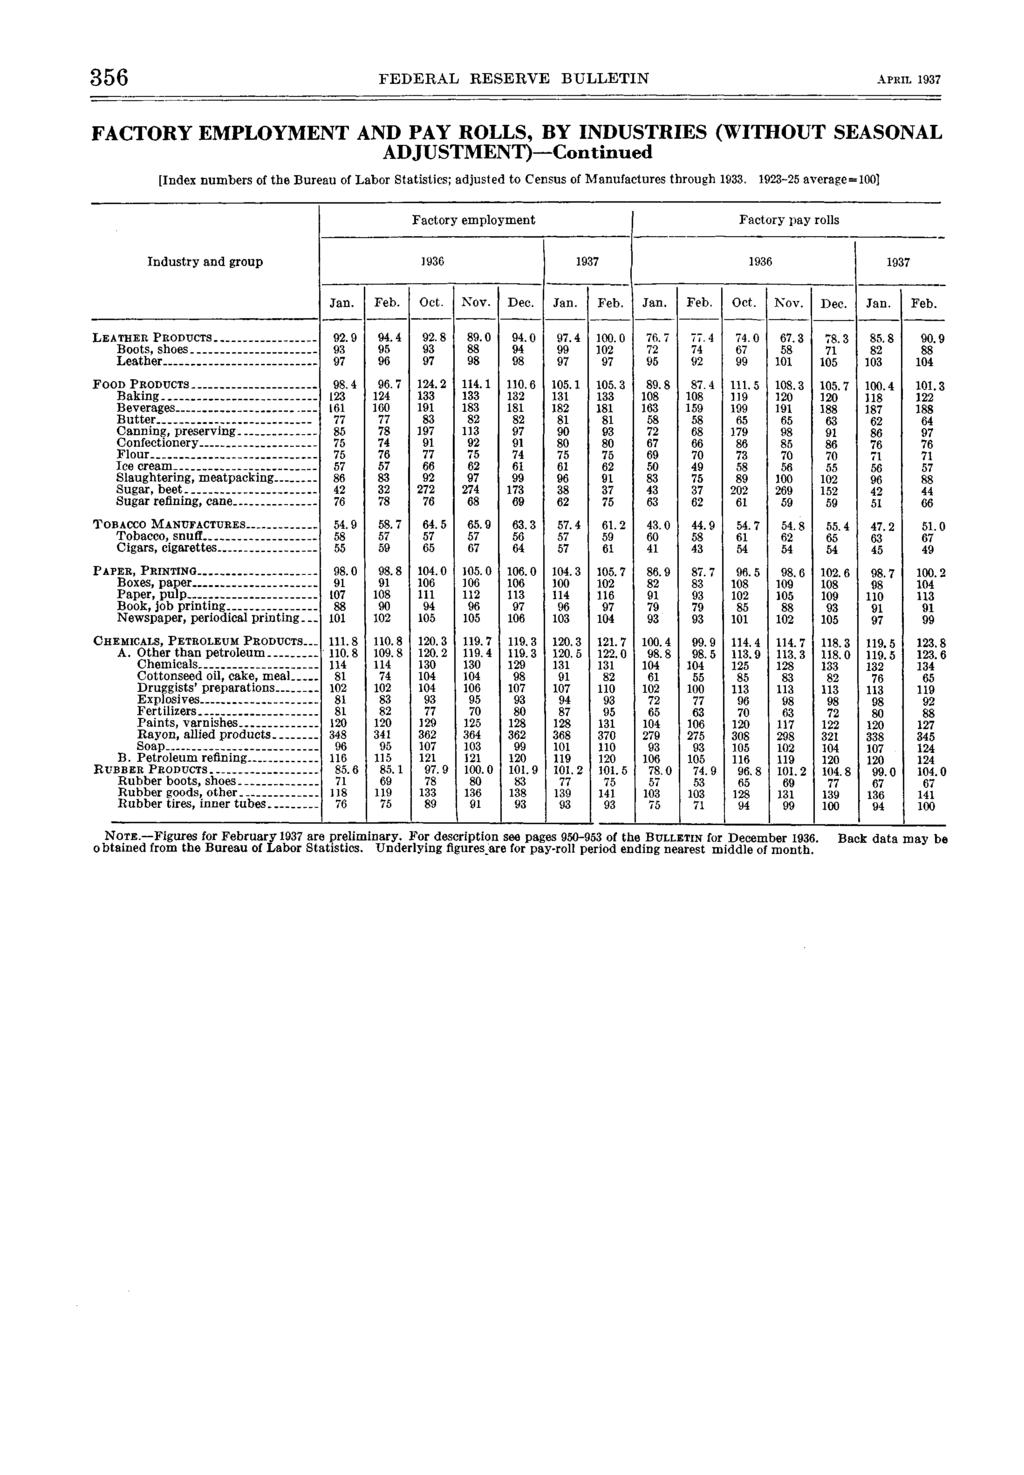 FEDERAL RESERVE BULLETIN APRIL FACTORY EMPLOYMENT AND PAY ROLLS, BY INDUSTRIES (WITHOUT SEASONAL ADJUSTMENT) Continued [Index numbers of the Bureau of Labor Statistics; adjusted to Census of